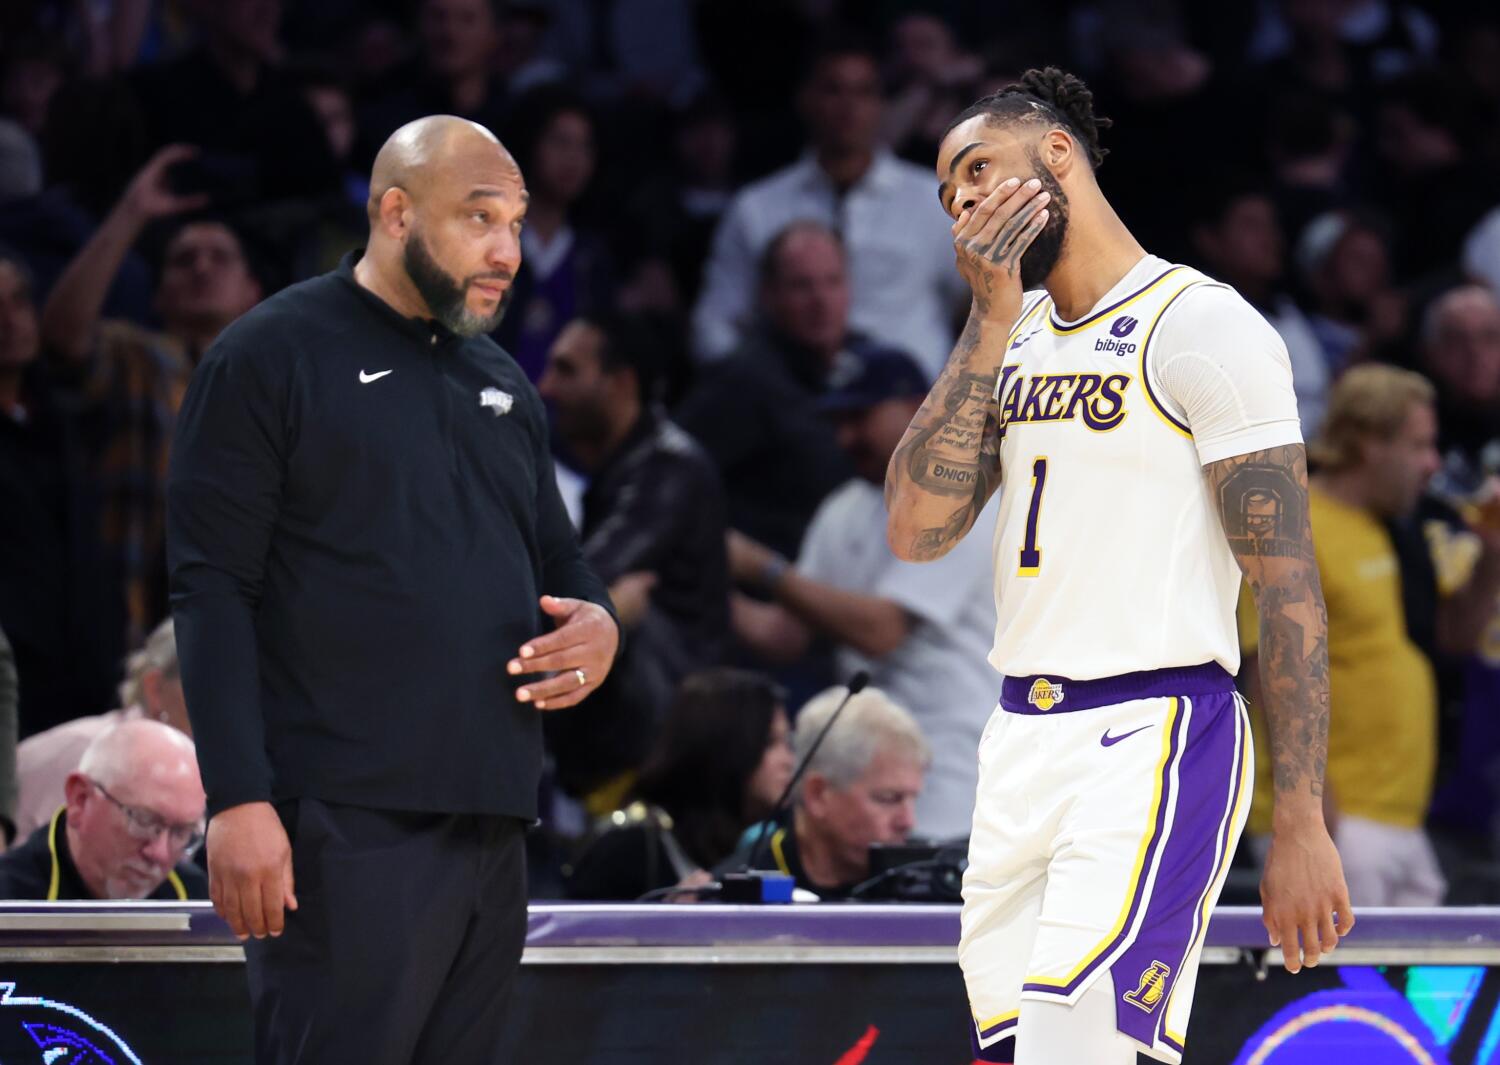 Analysis: Lakers frustrated they can't beat Nuggets, and the problem is getting worse